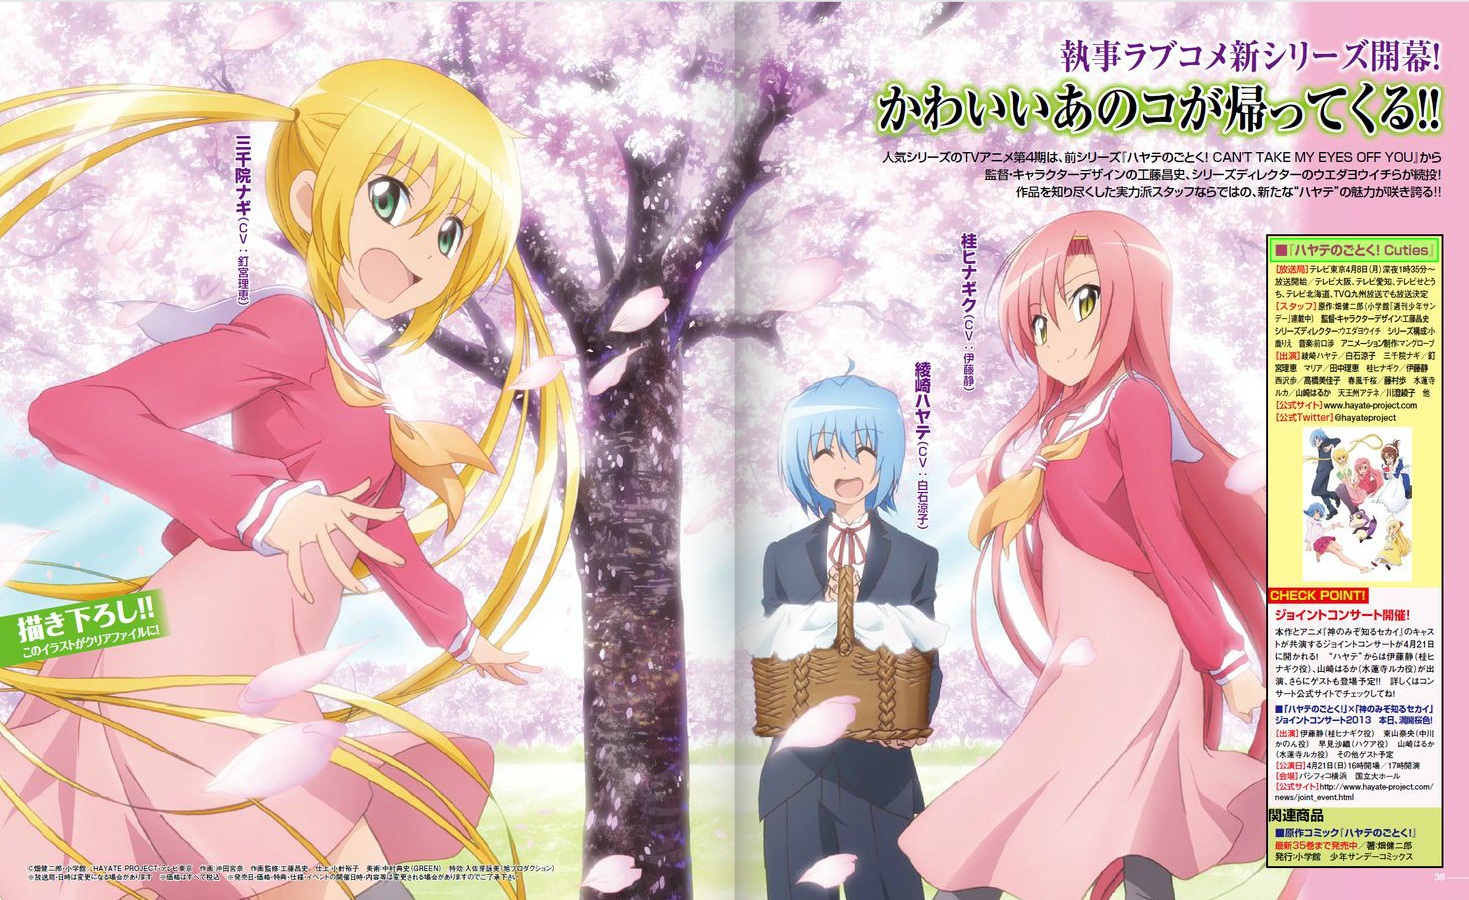 Hayate No Gotoku Cuties News Centre Hayate Report Hayate the combat butler (hayate no gotoku) is a japanese manga series, written and illustrated by kenjiro hata, about a boy who starts a new job as a butler and the events he experiences with his employer. hayate report wordpress com